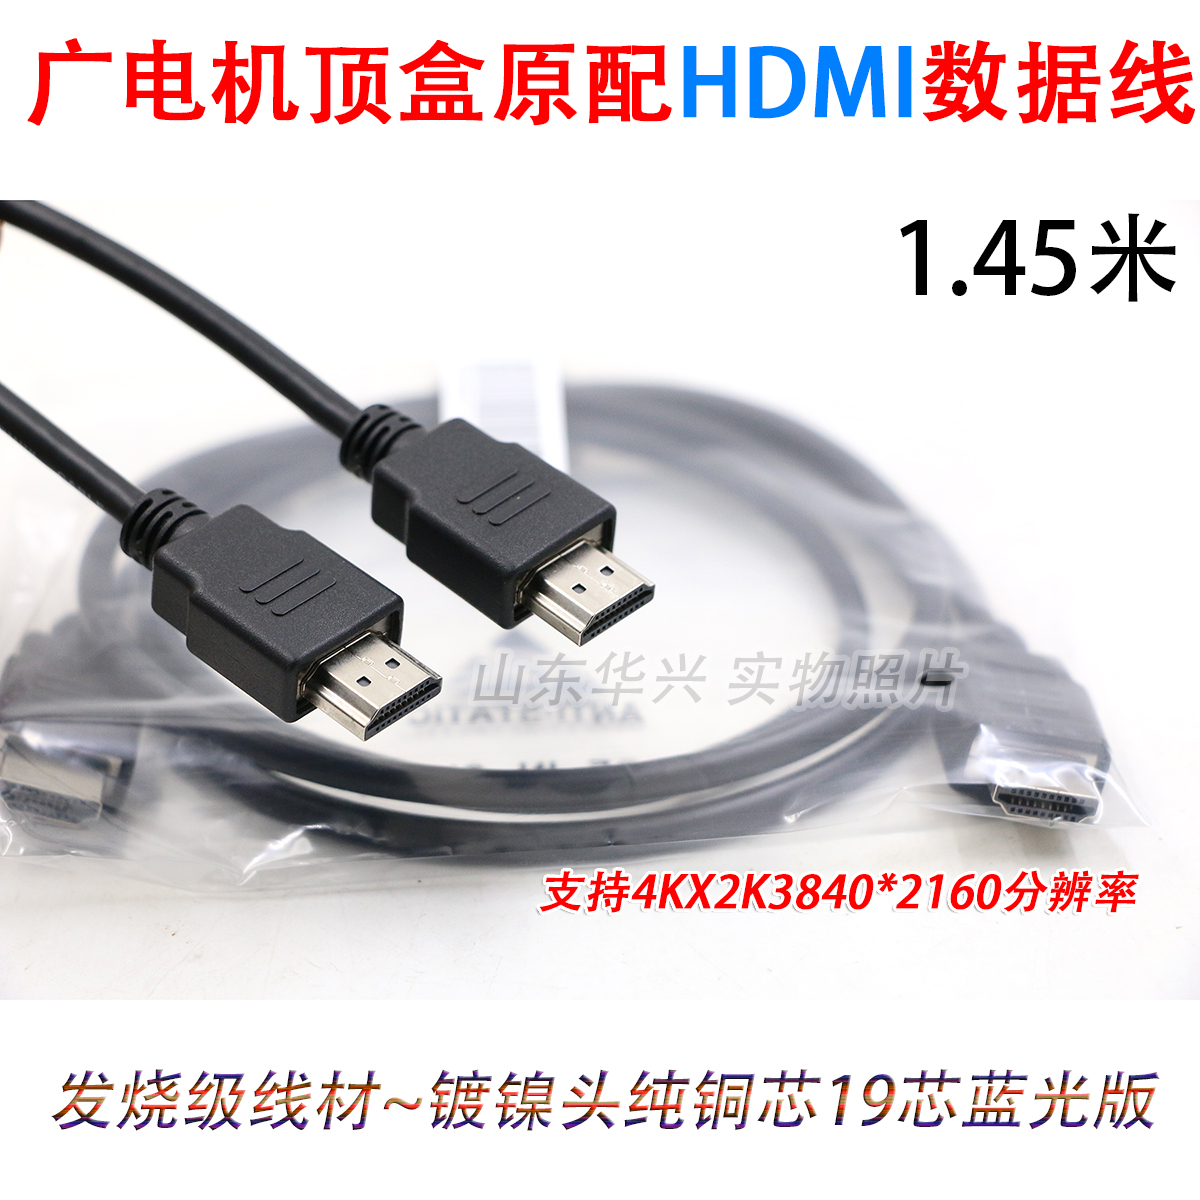 HD HDMI cable HDMI high quality cable 1 4 version 3D data 4k computer TV connection data cable 1 5 meters 2 meters